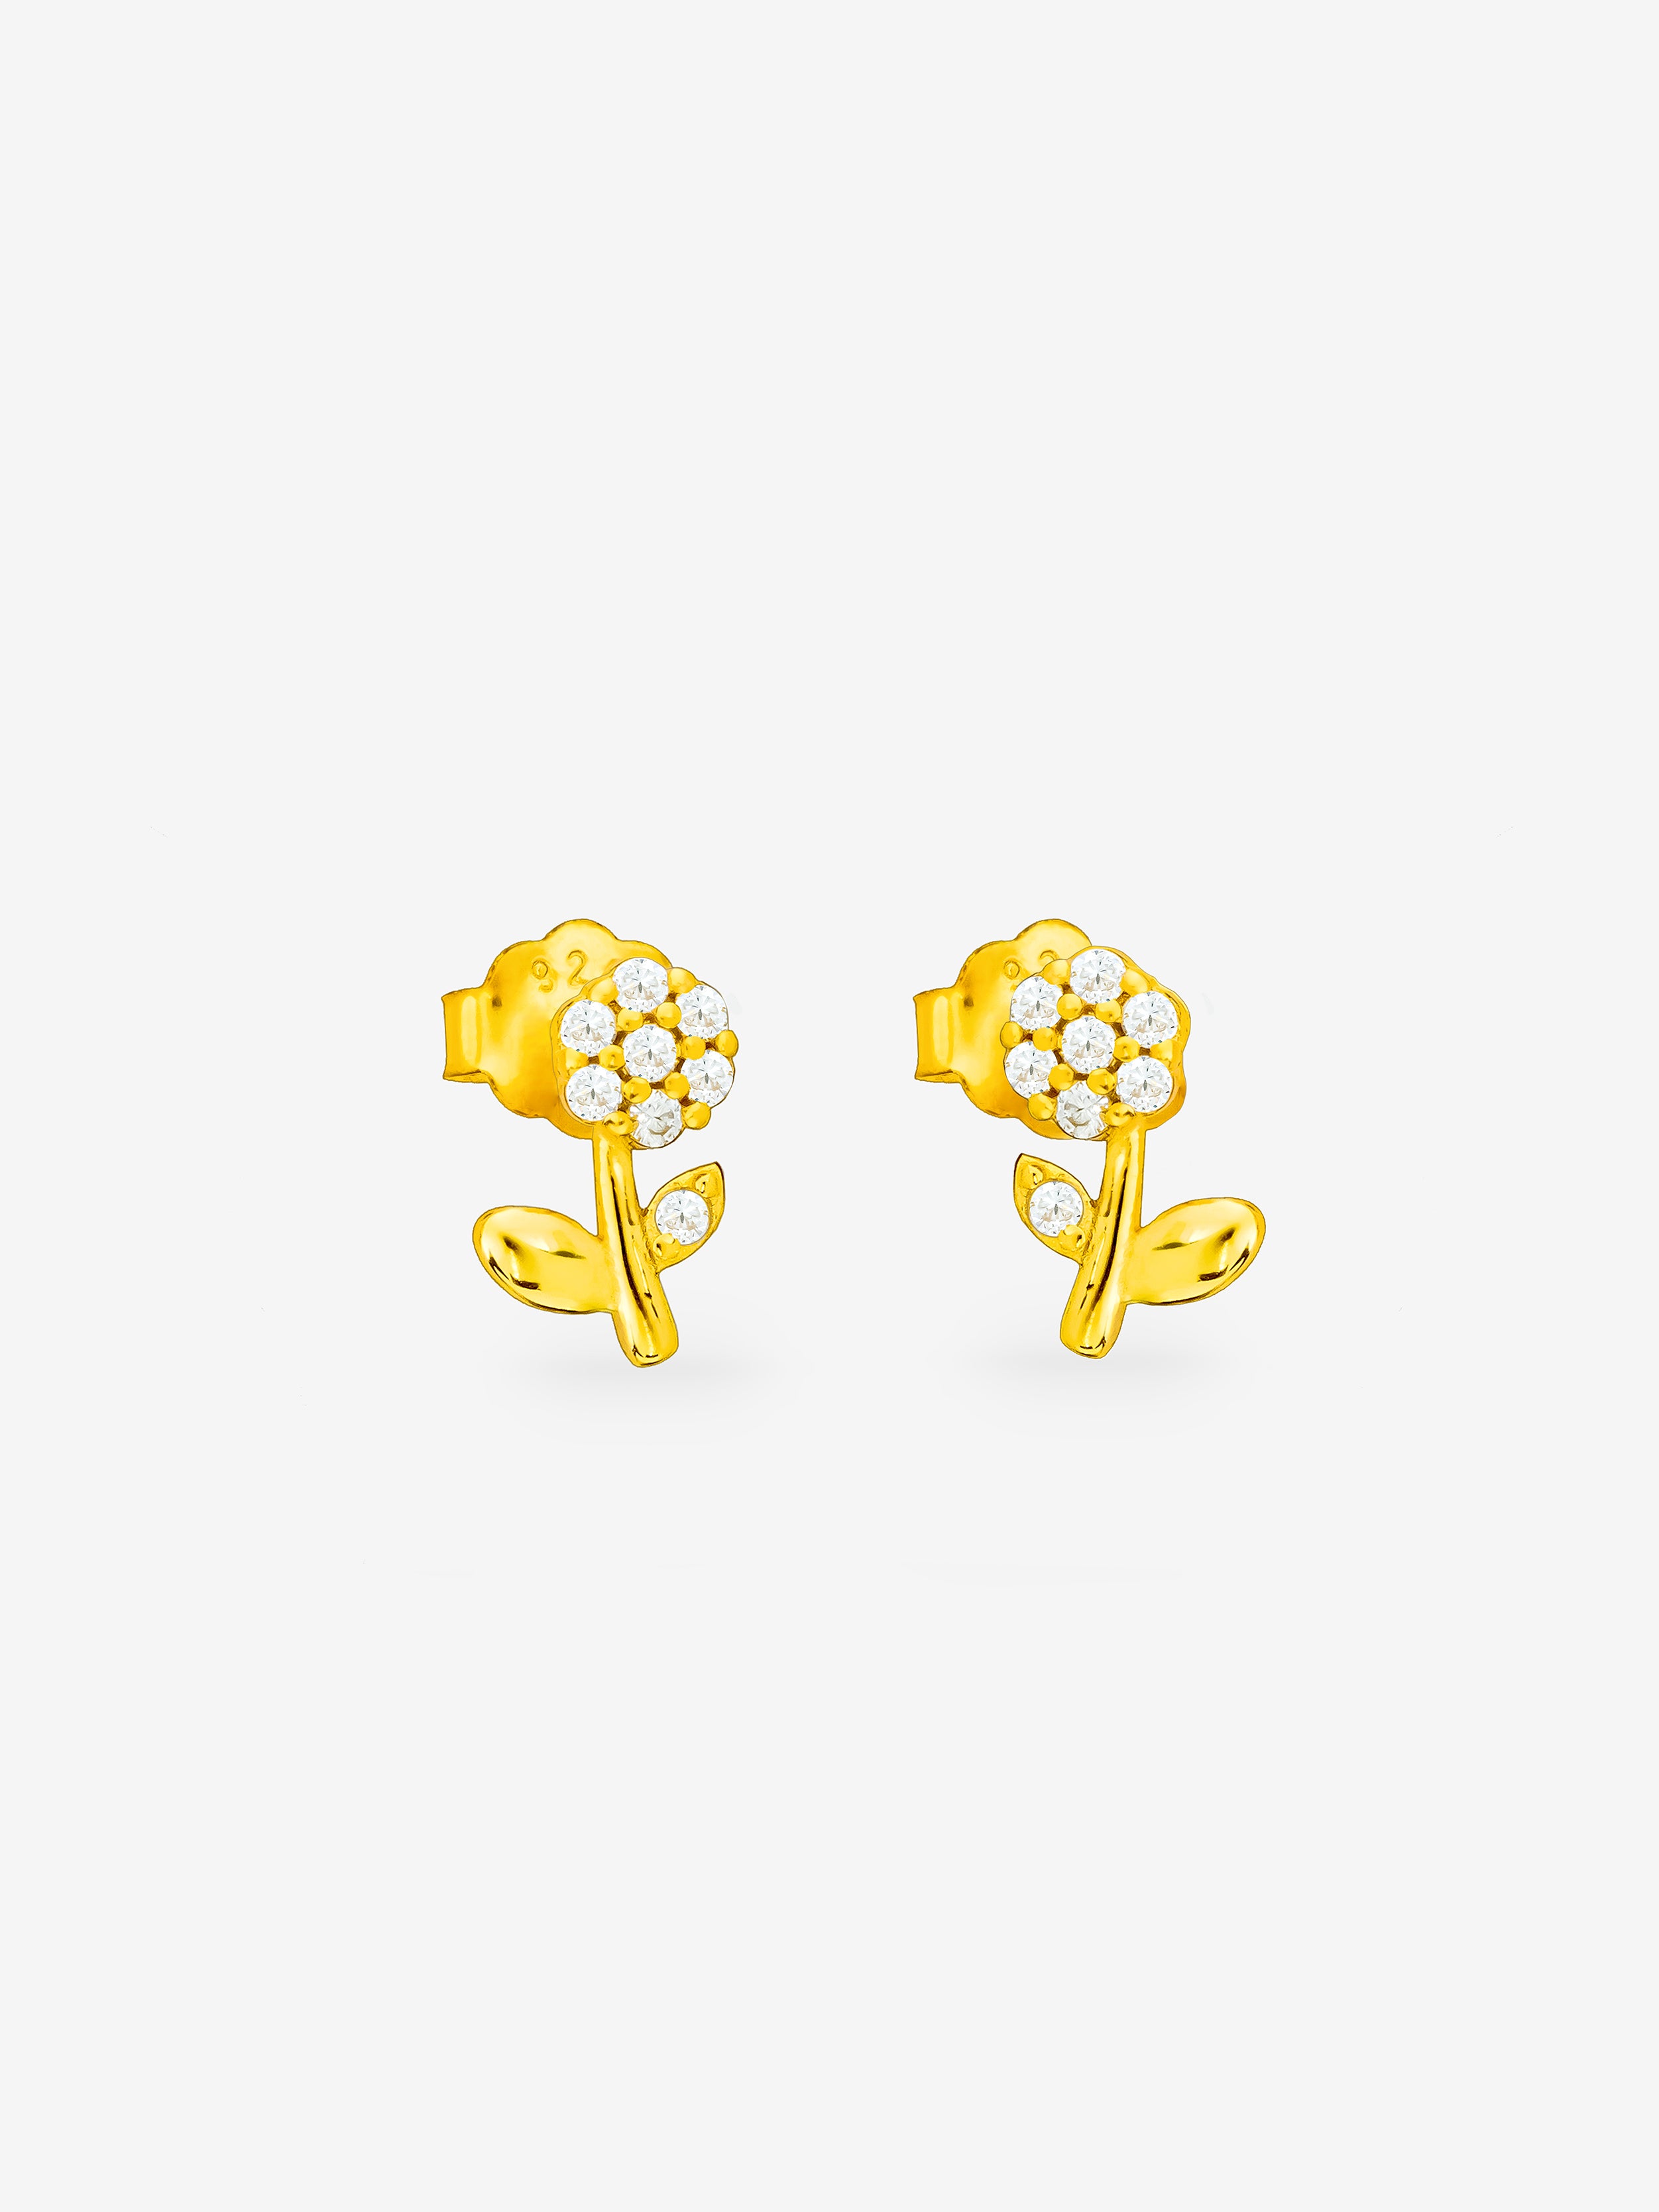 Gold Flower Stud Earrings With Stones